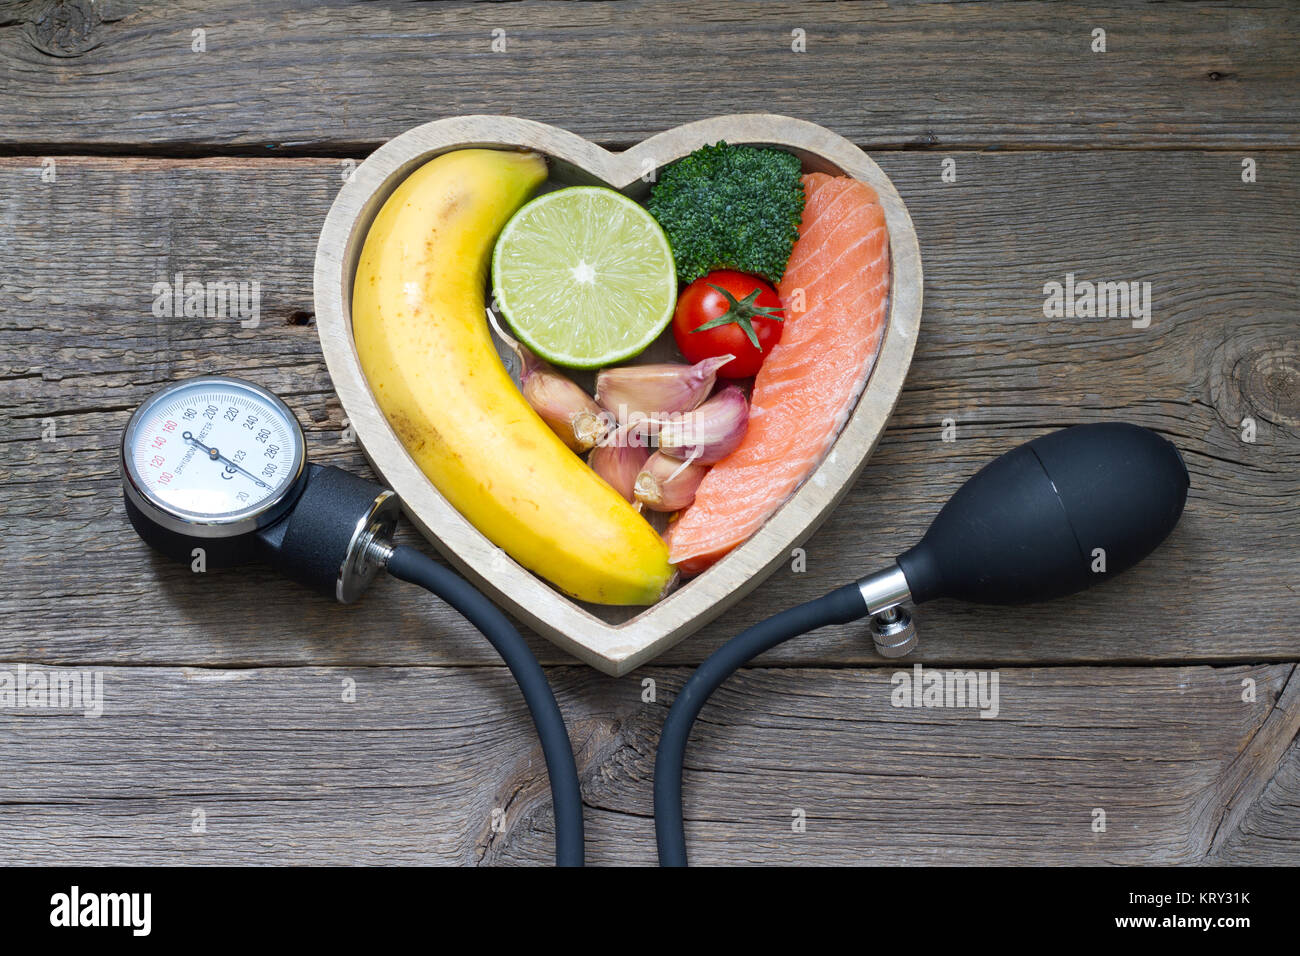 Health heart diet food concept with blood pressure gauge Stock Photo